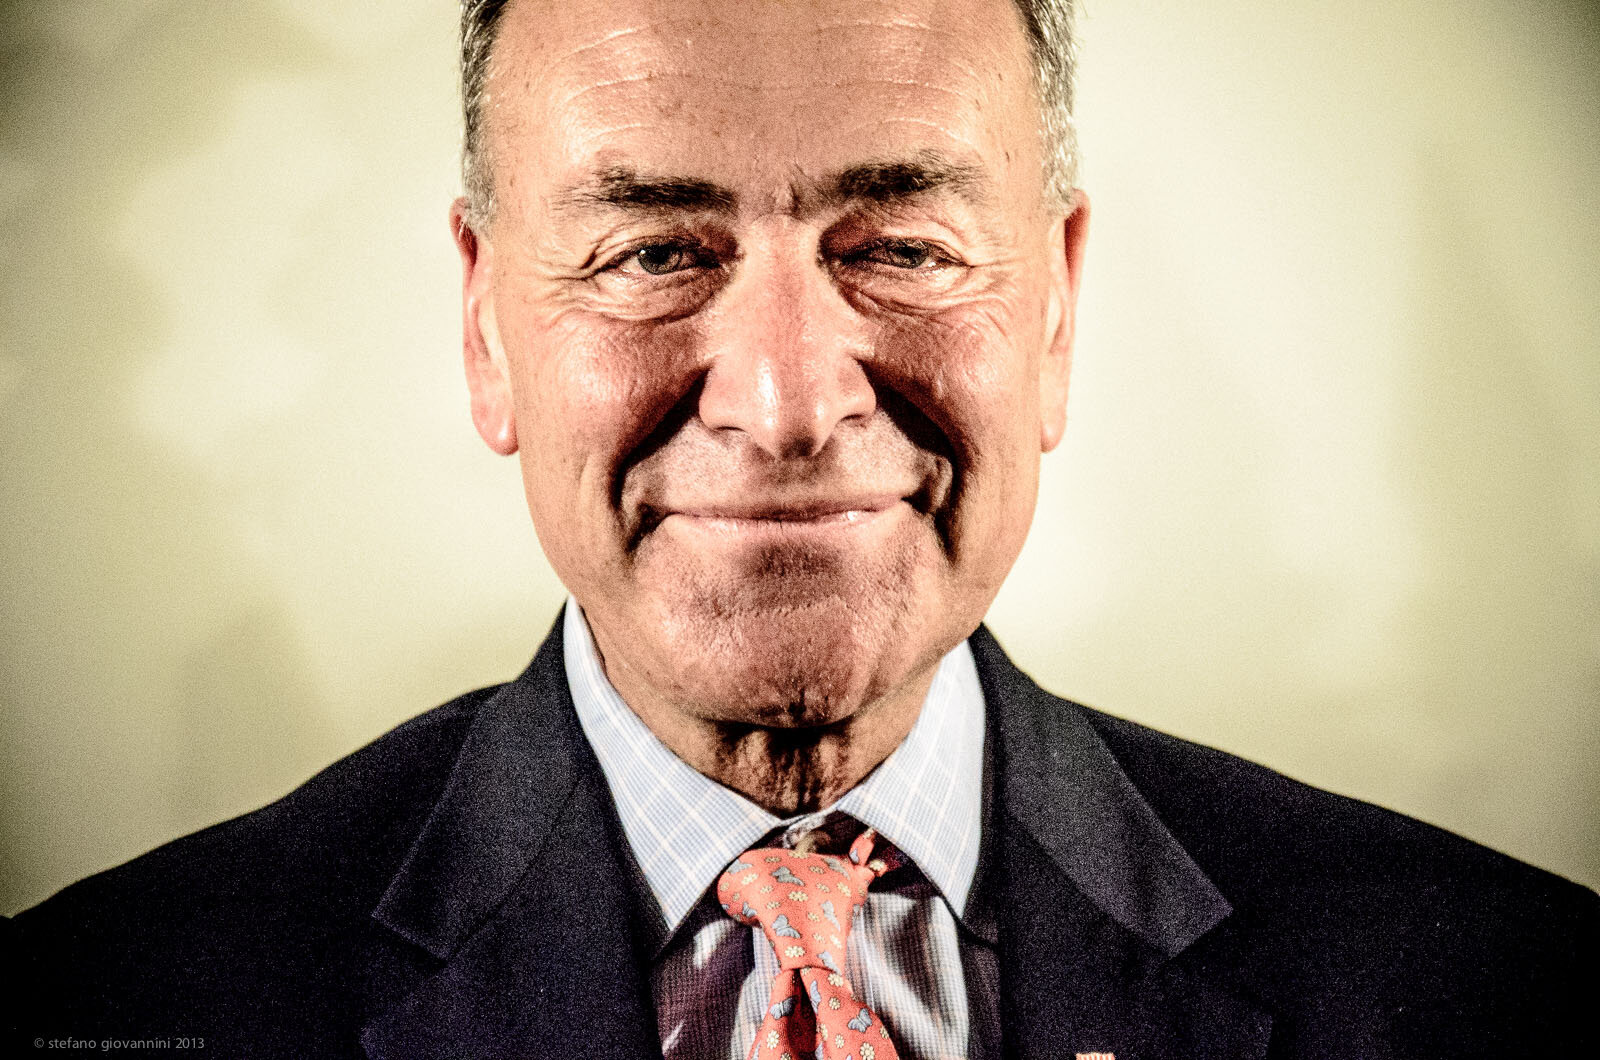  US senator Chuck Schumer. Assemblyman Walter Mosley, tonight at 6:30 on the 9th Floor of 55 Hanson Place. The contact is Javier at 562-293-6409. 